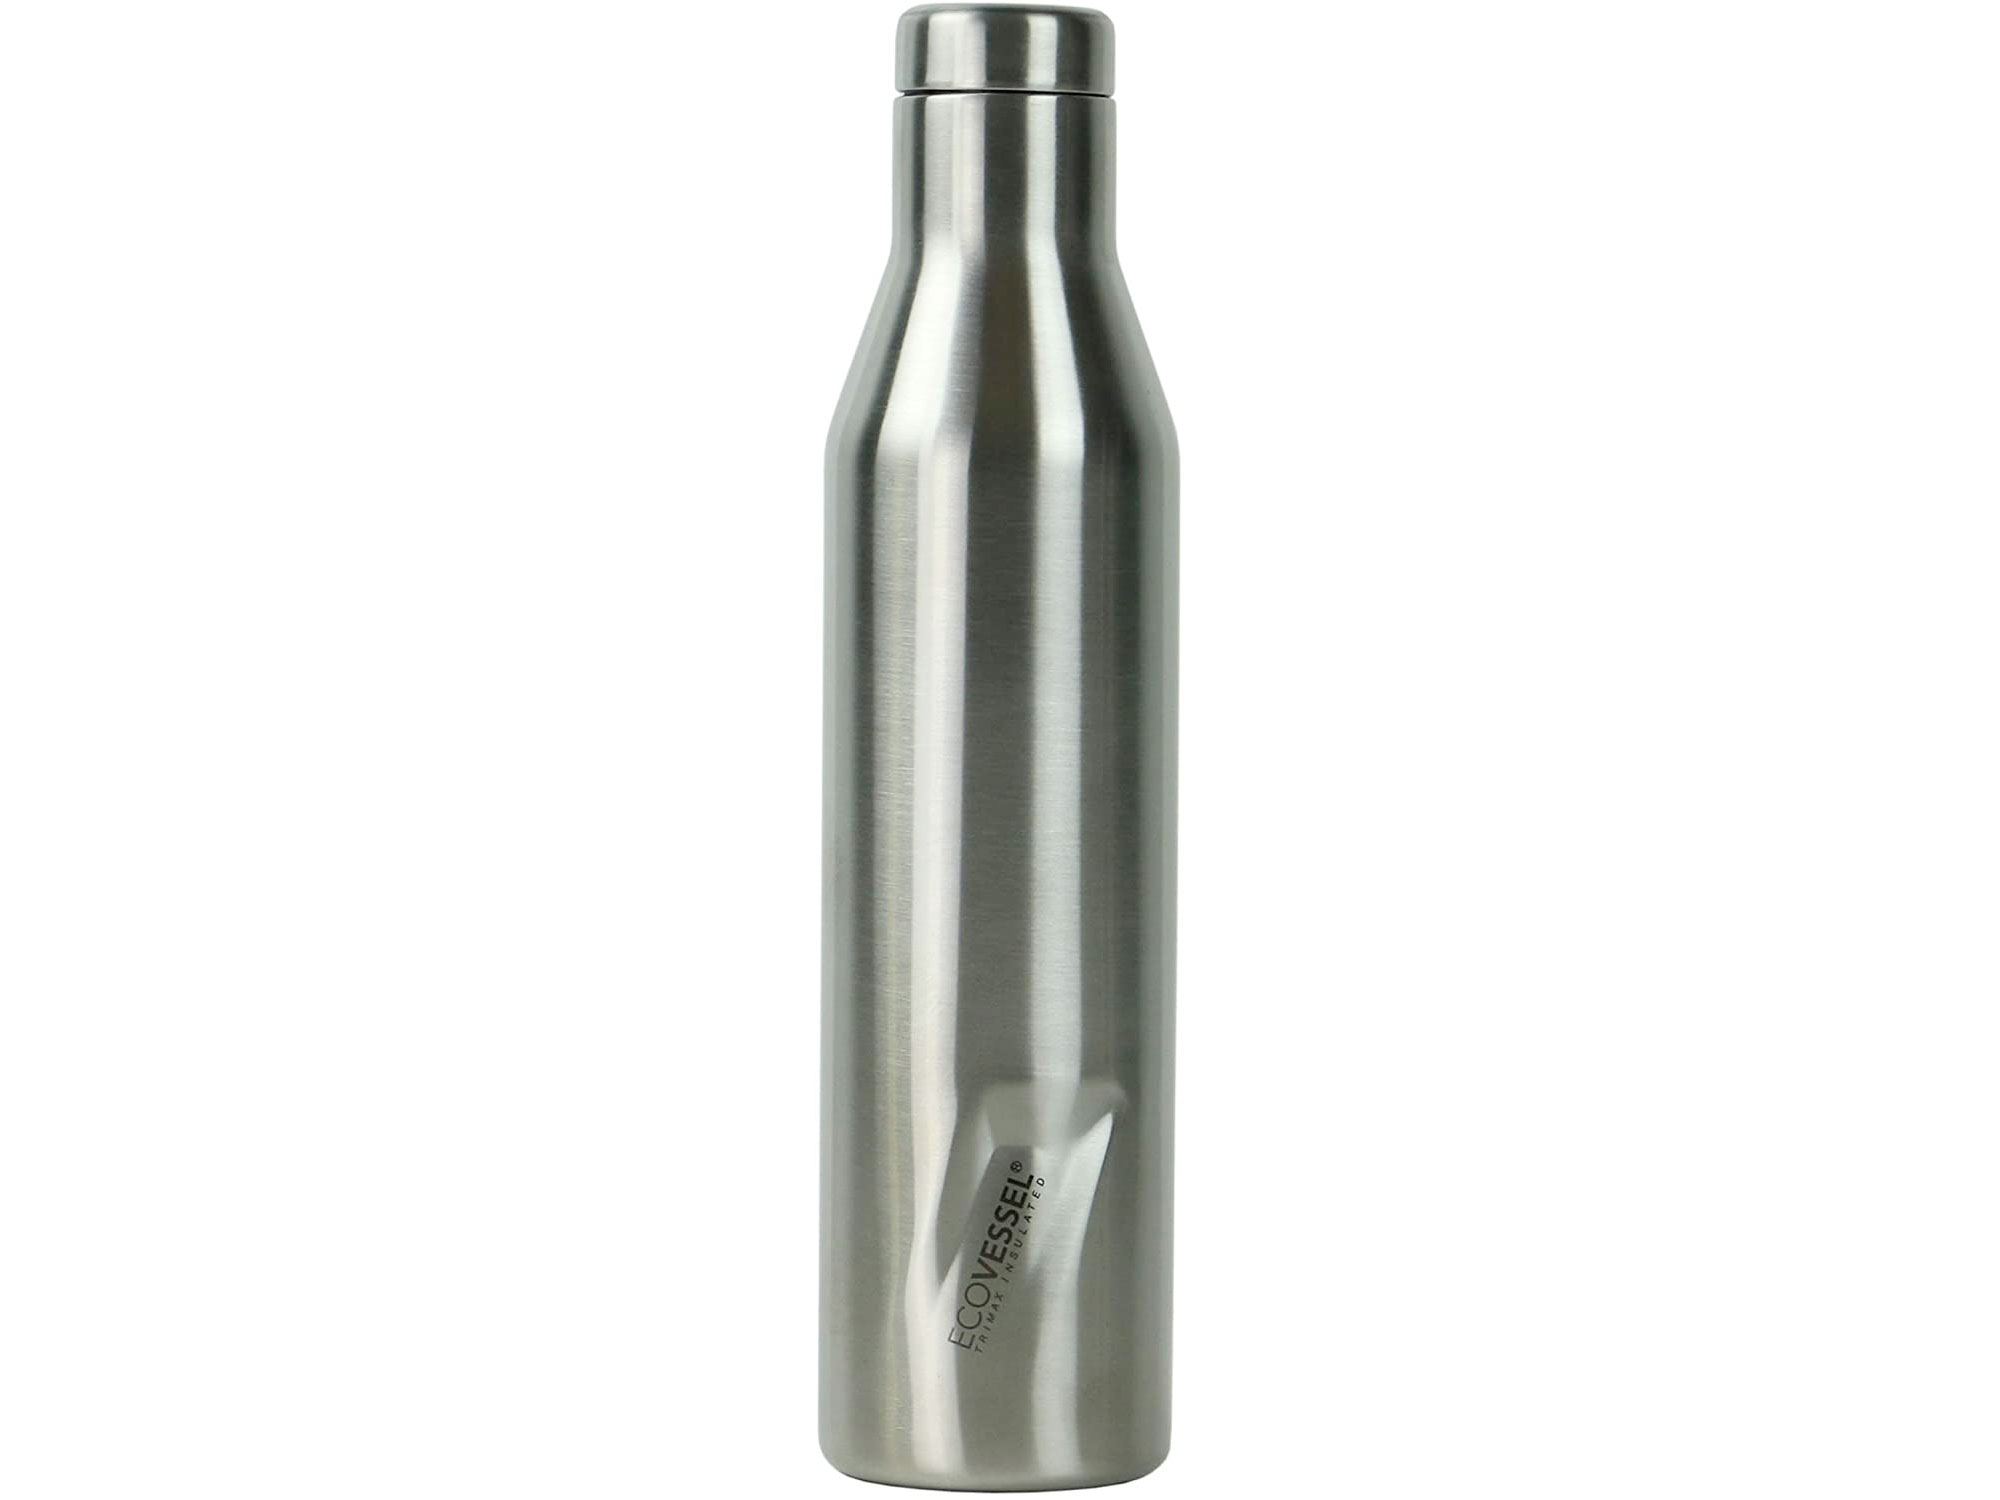 Amazon：EcoVessel 25oz Insulated Stainless Steel Water Bottle只卖$14.72